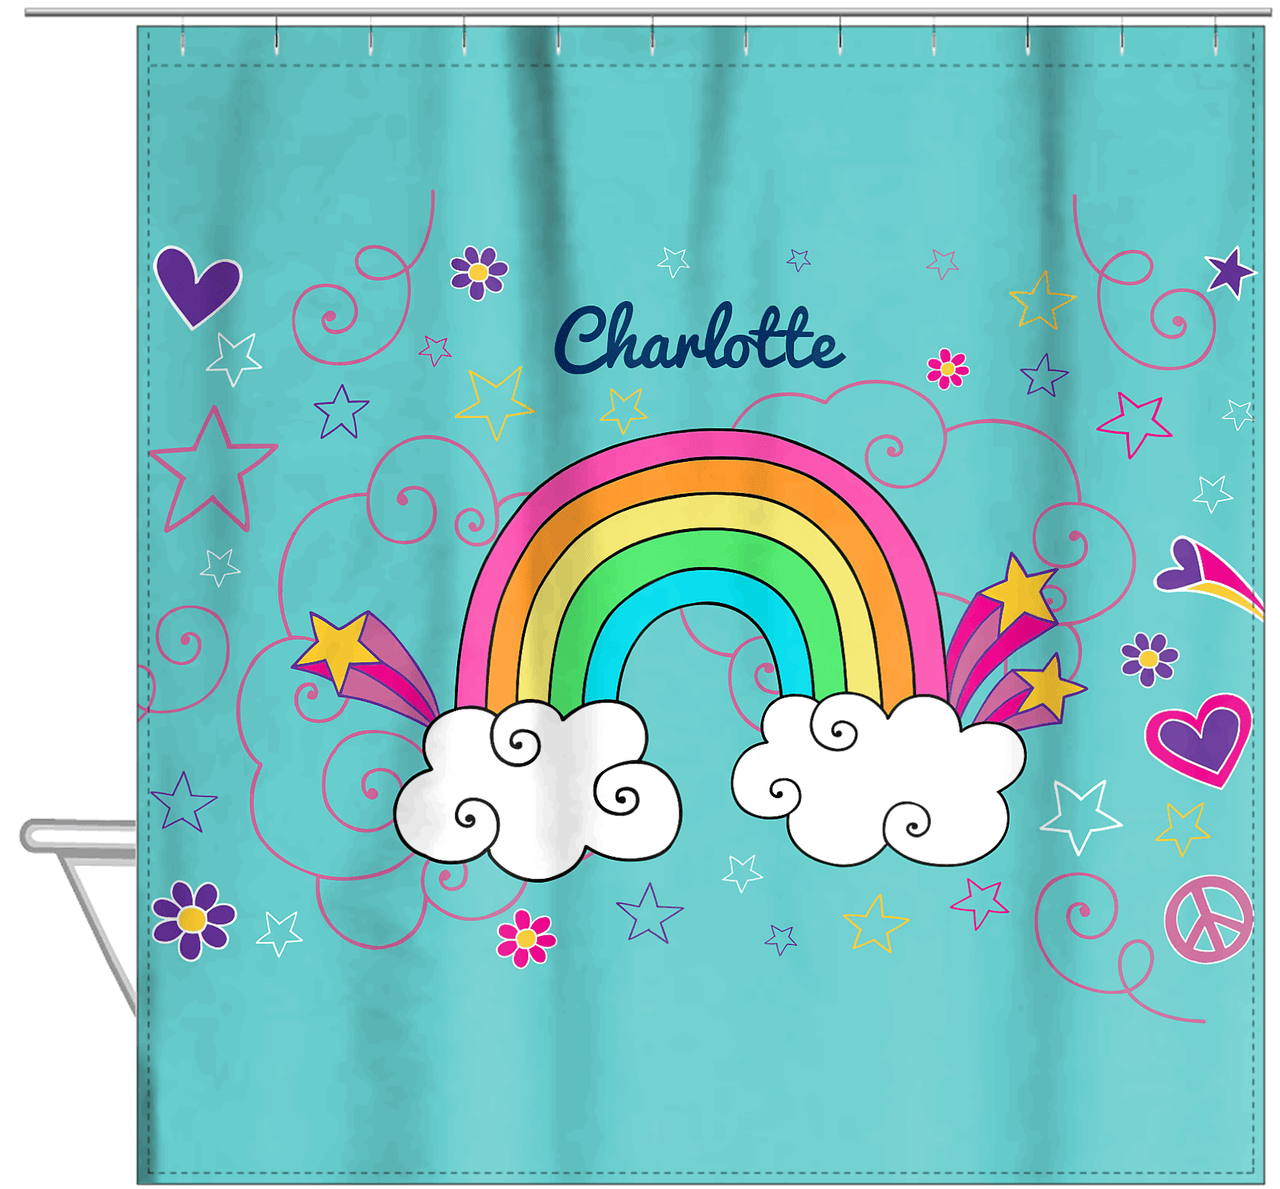 Personalized Rainbows Shower Curtain VI - Rainbow Doodle - Teal Background - Hanging View